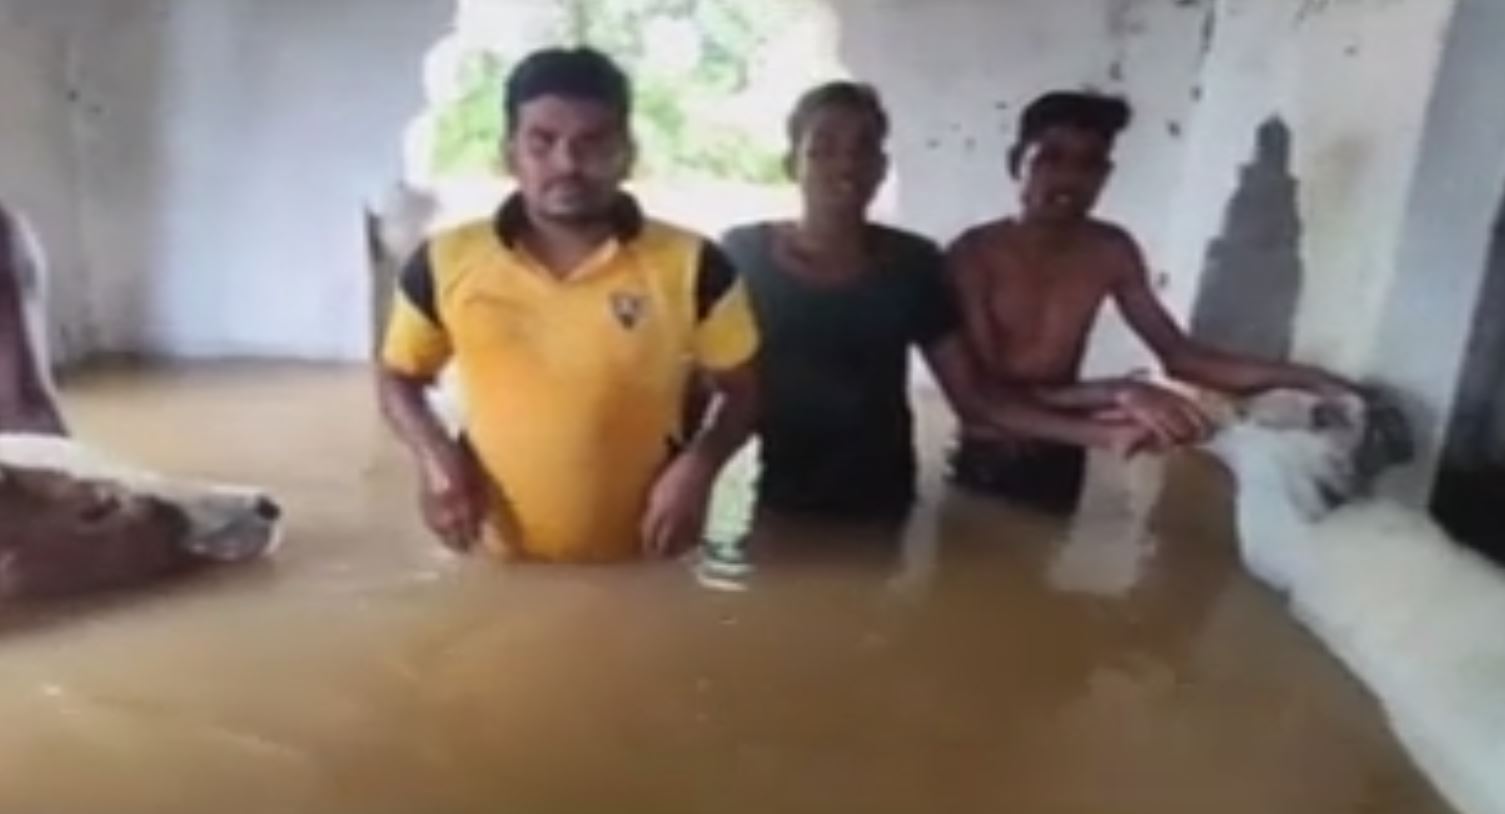 floods due to heavyr rainfall several states in India